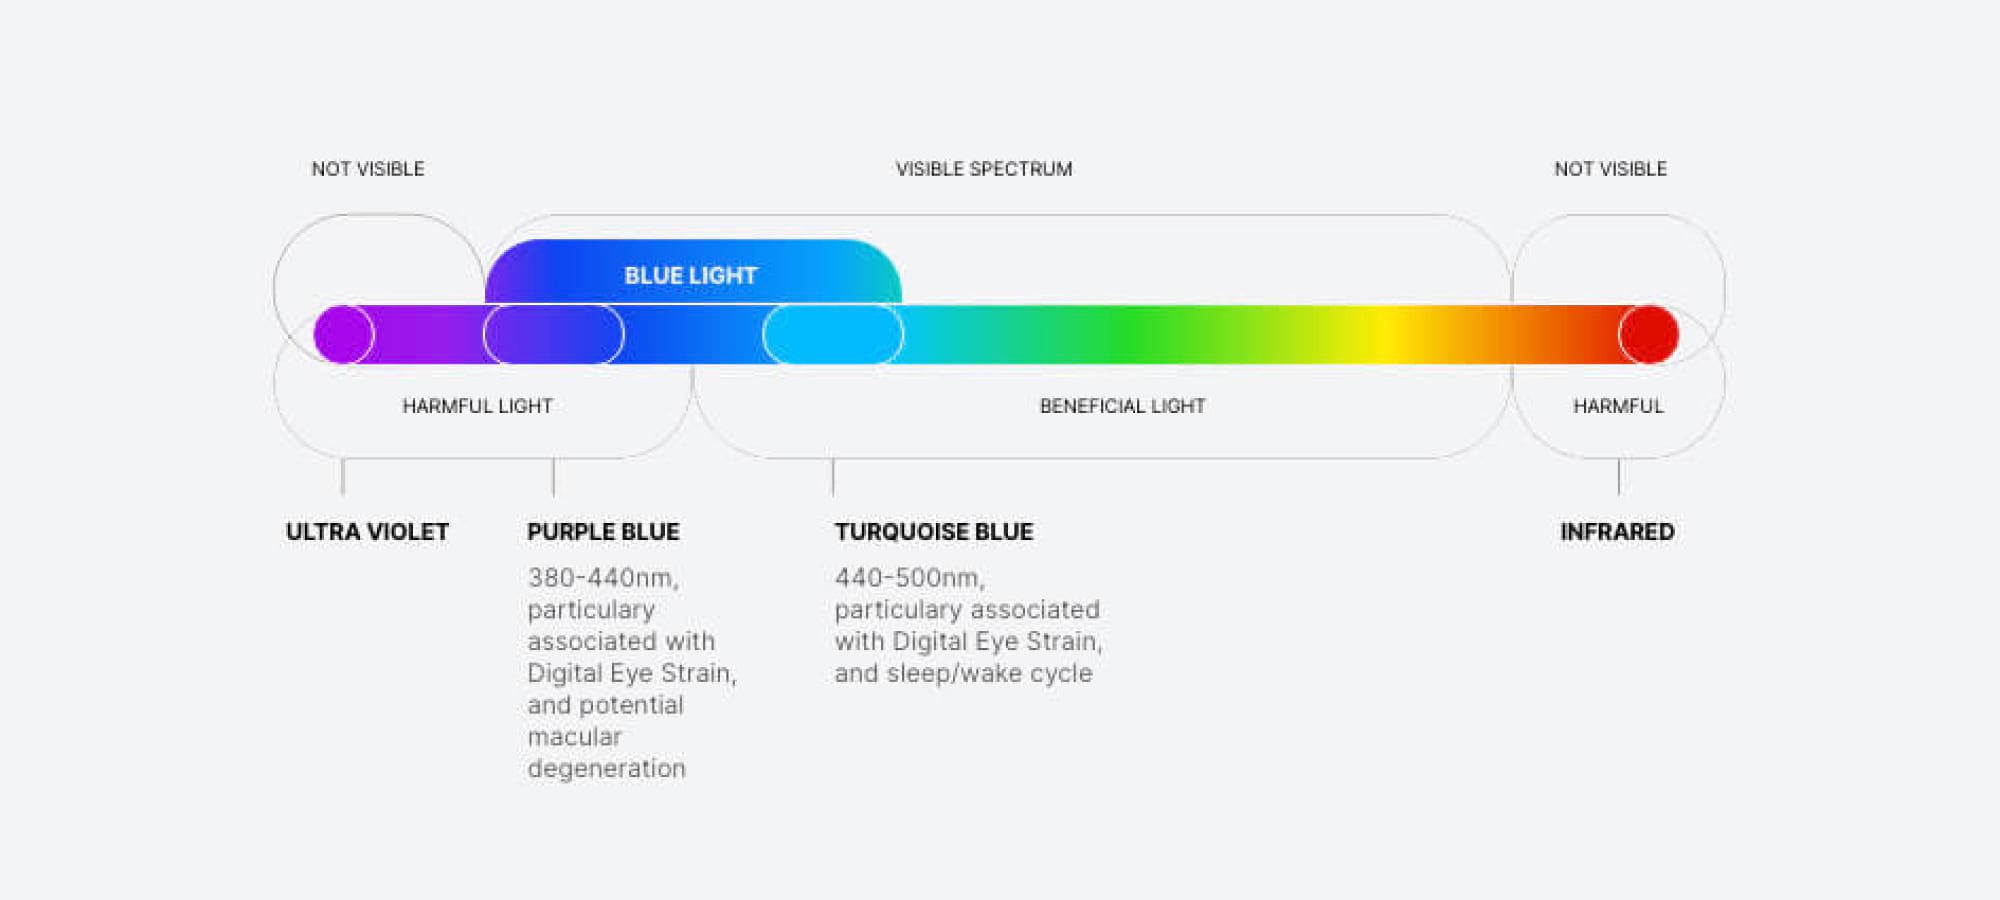 A Guide To The Spectrums of Light